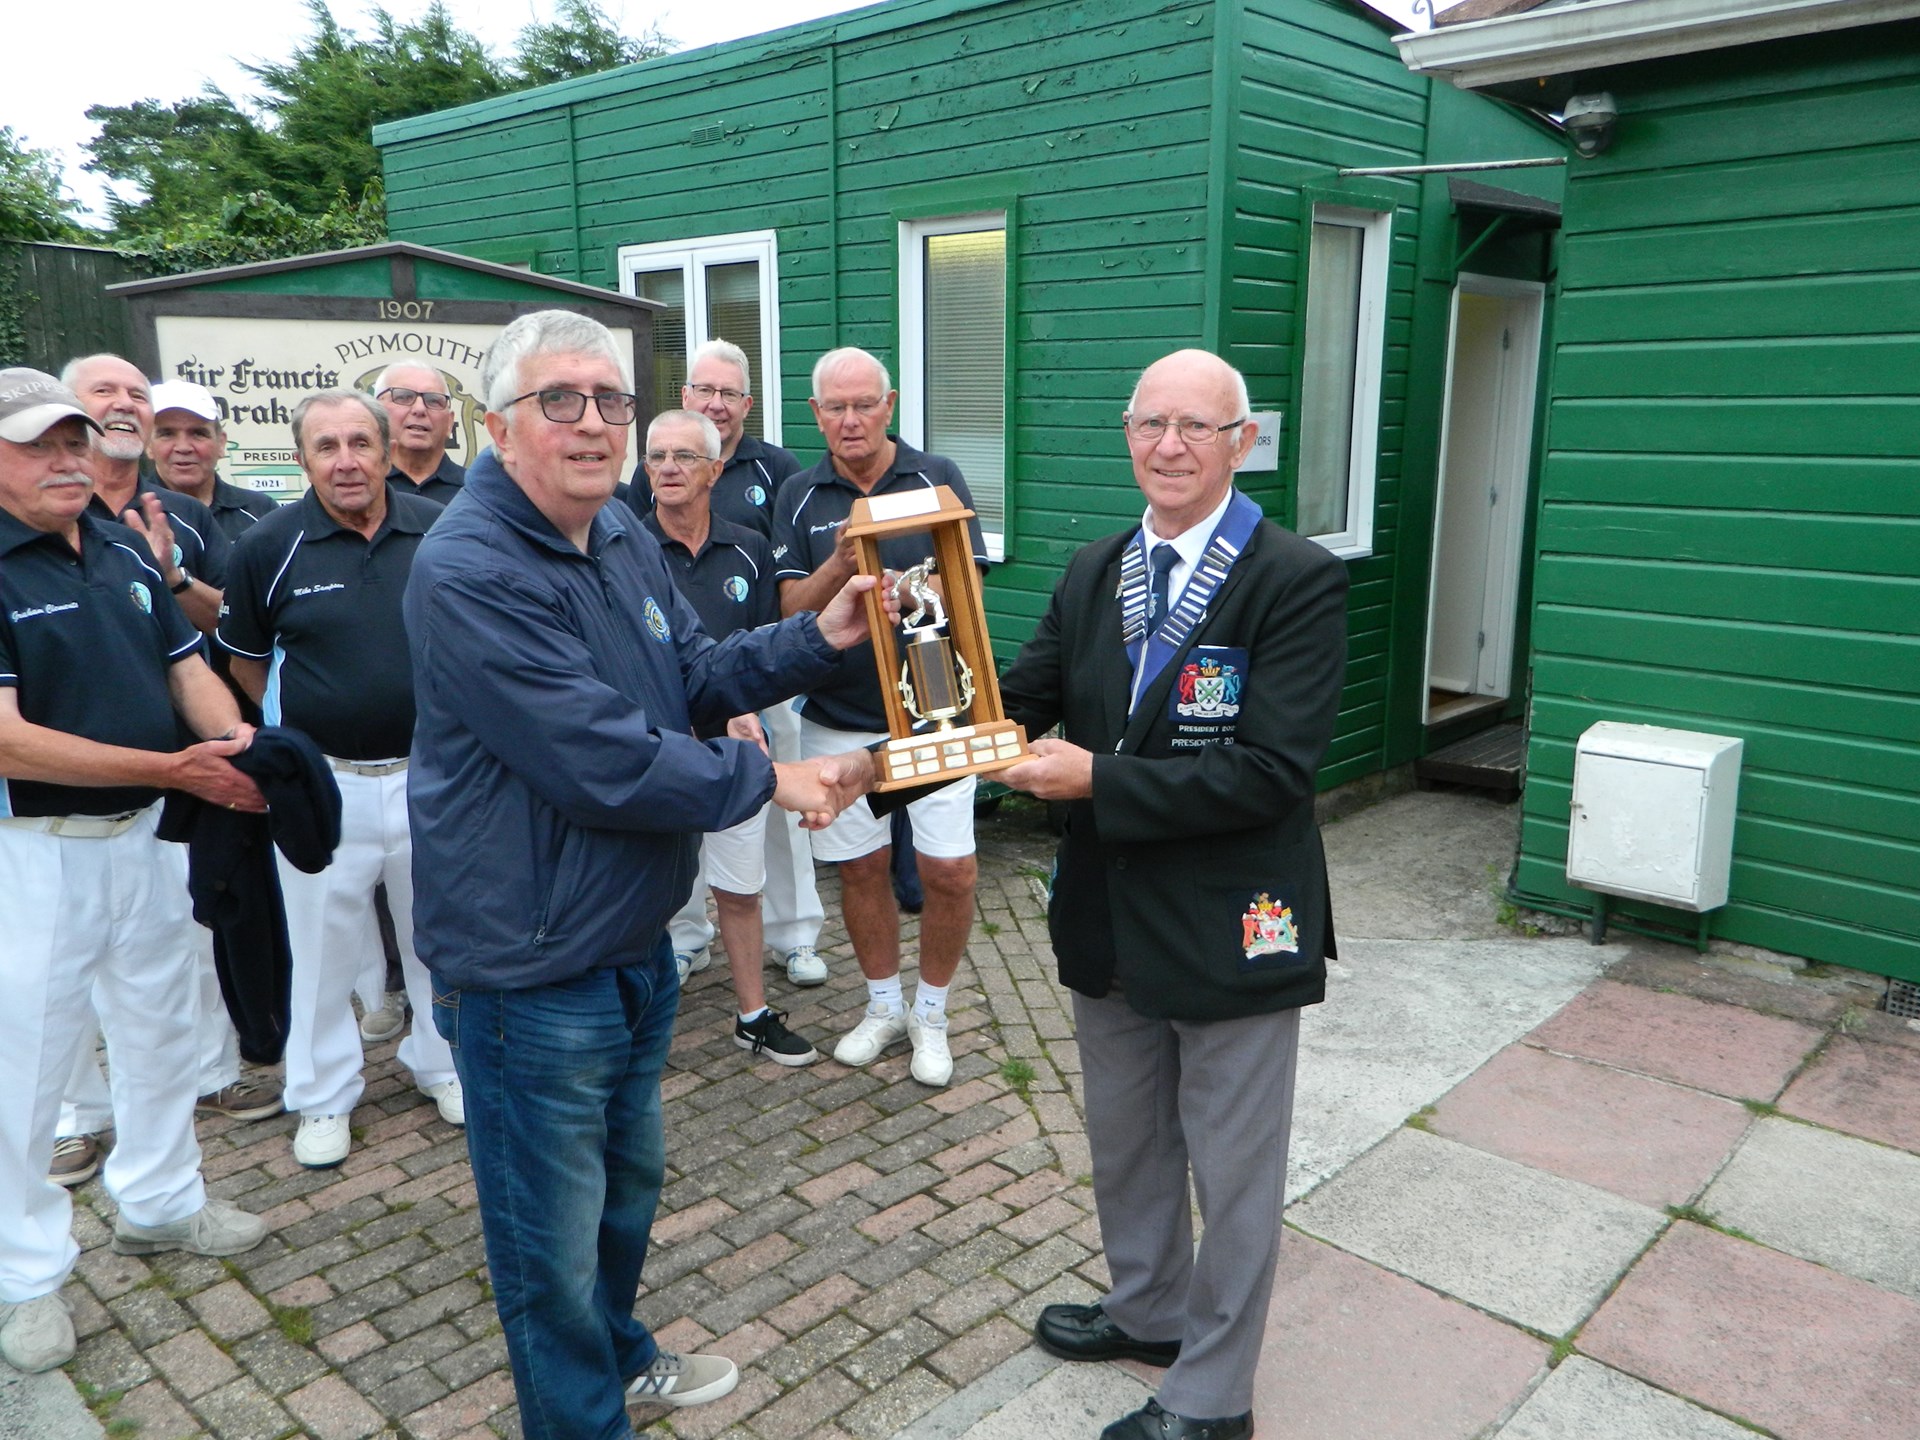 Mike Philp presenting roger Warne with the Farley trophy